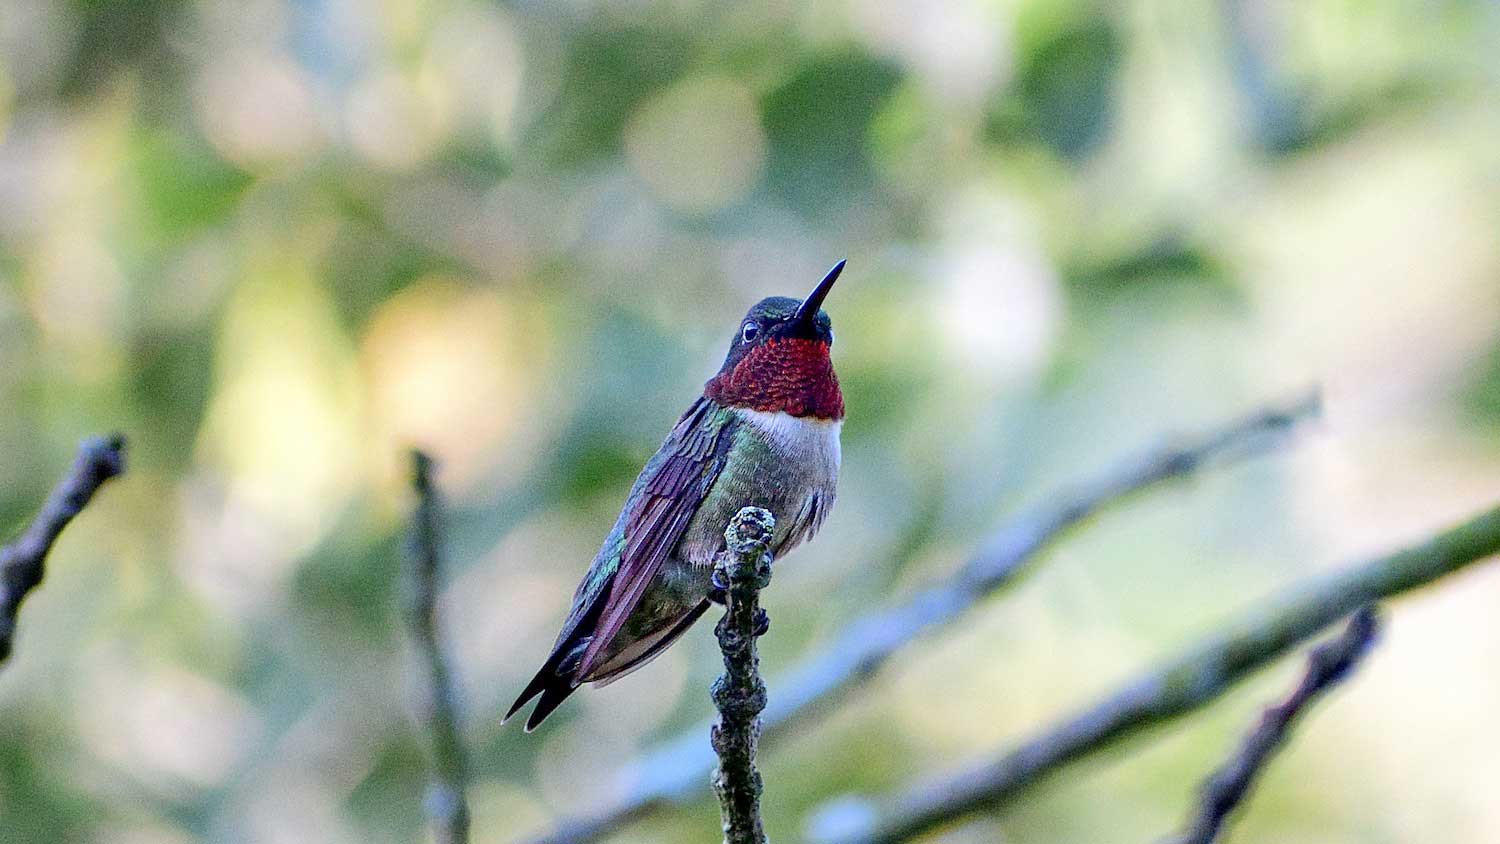 A ruby-throated hummingbird perched on the tip of a branch.